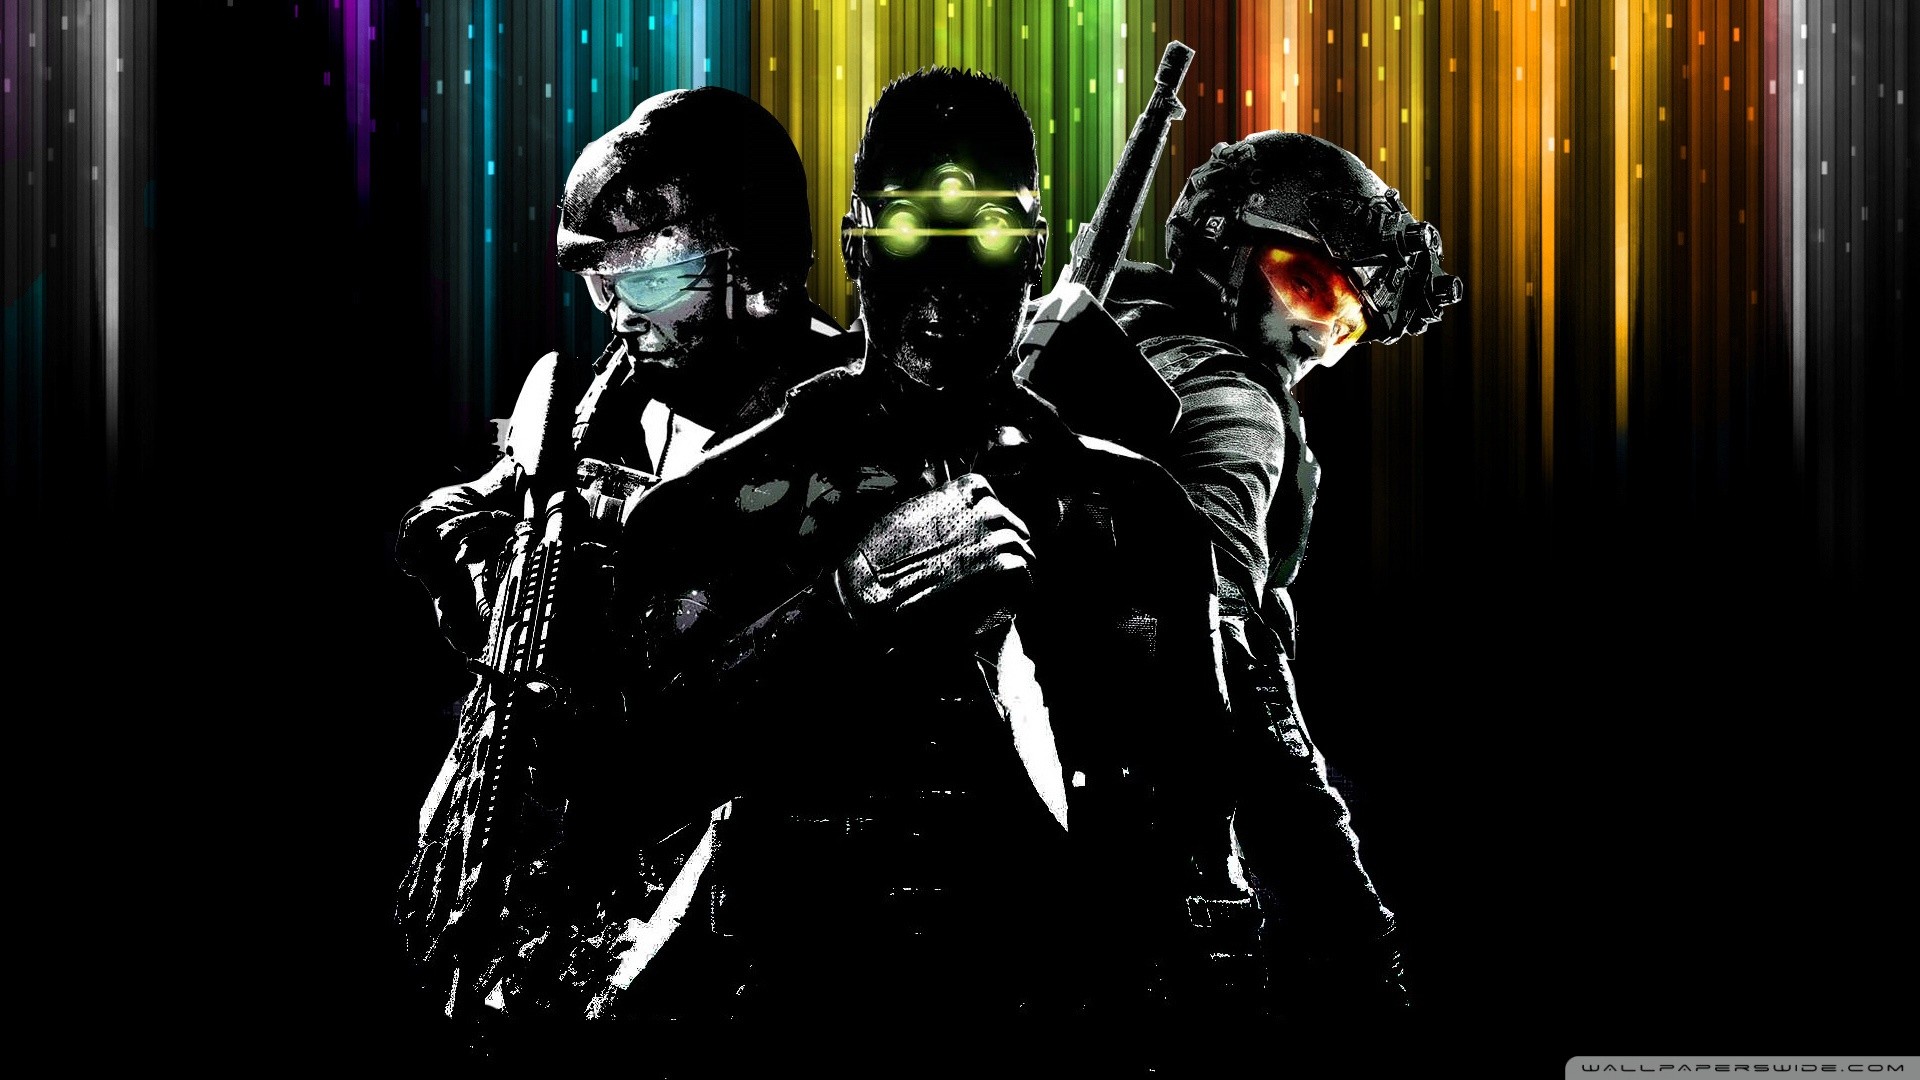 Tom Clancys Ghost Recon Video Games Tom Clancys Tom Clancys Splinter Cell Tom Clancys Rainbow Six 1920x1080